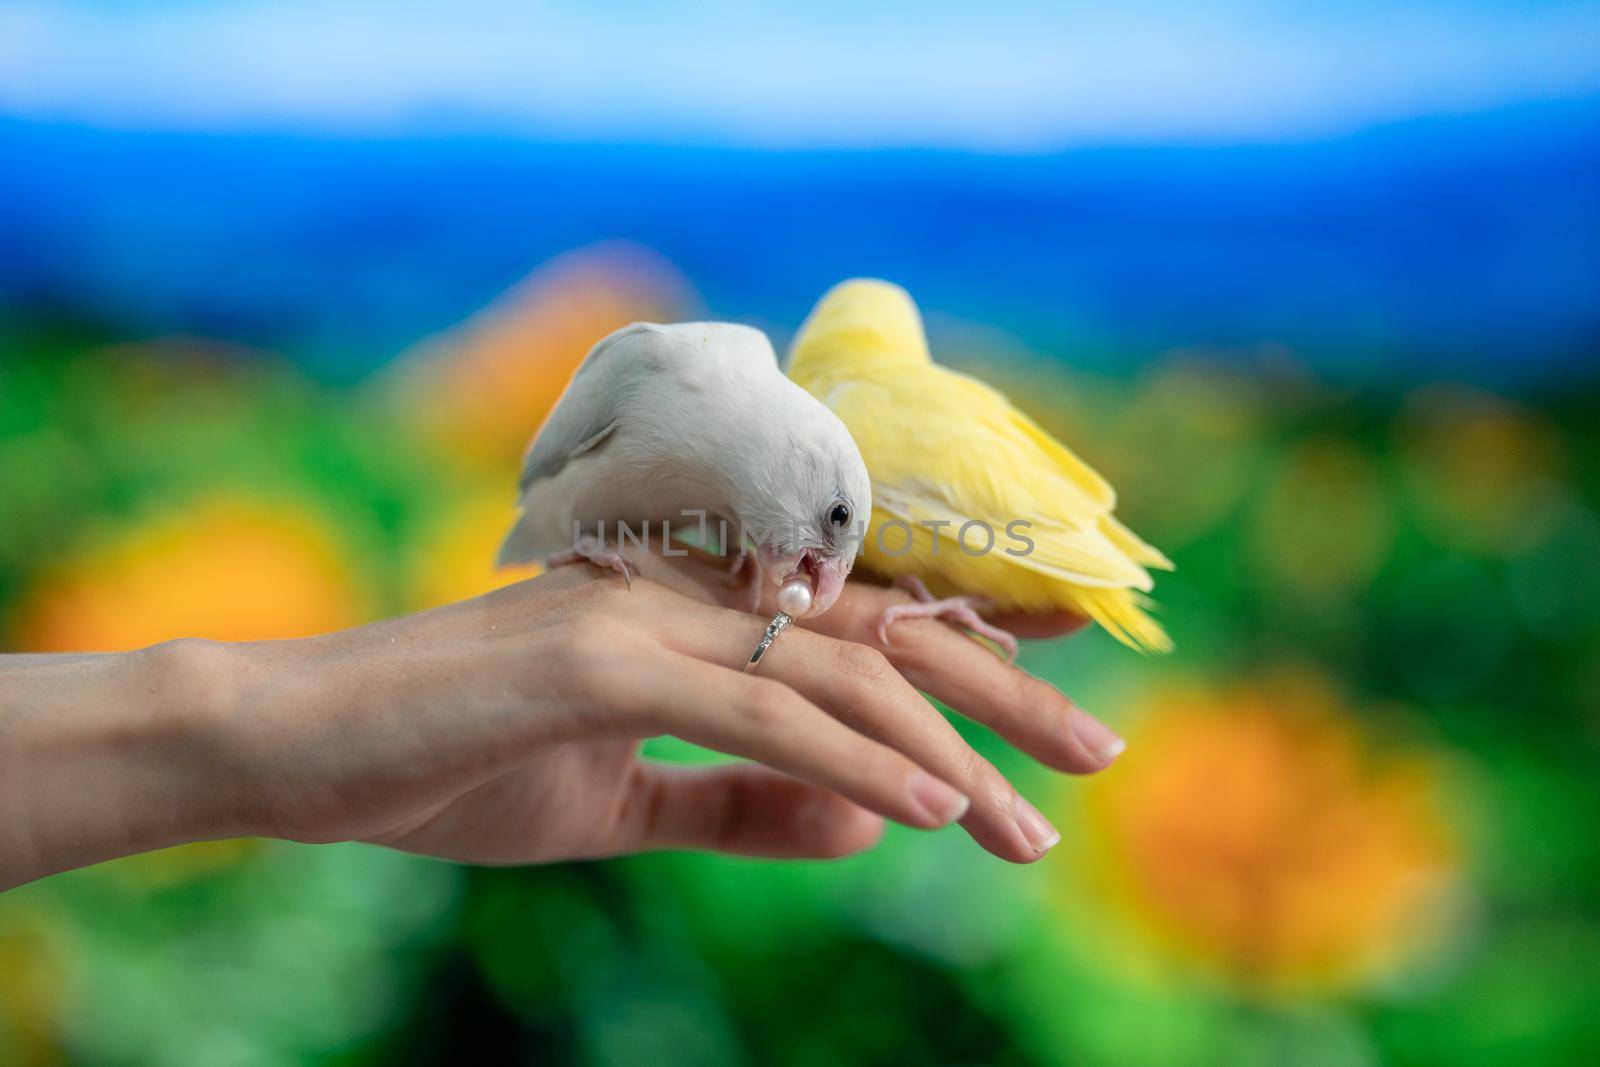 Tiny parrot yellow and white Forpus bird on hand, white parrot try to bite pearl ring.